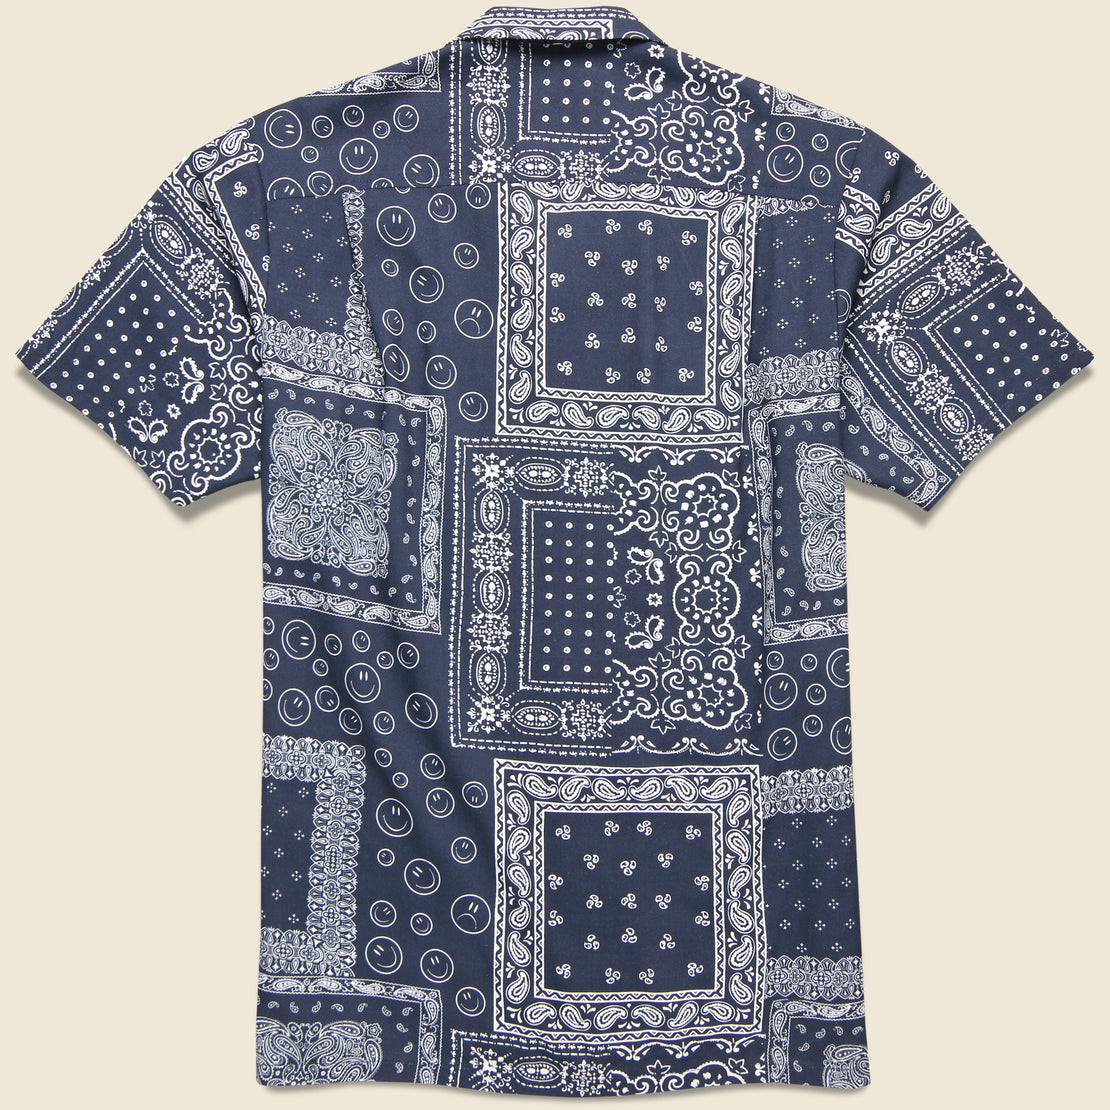 Bandana Print Camp Shirt - Navy - Bather - STAG Provisions - Tops - S/S Woven - Other Pattern